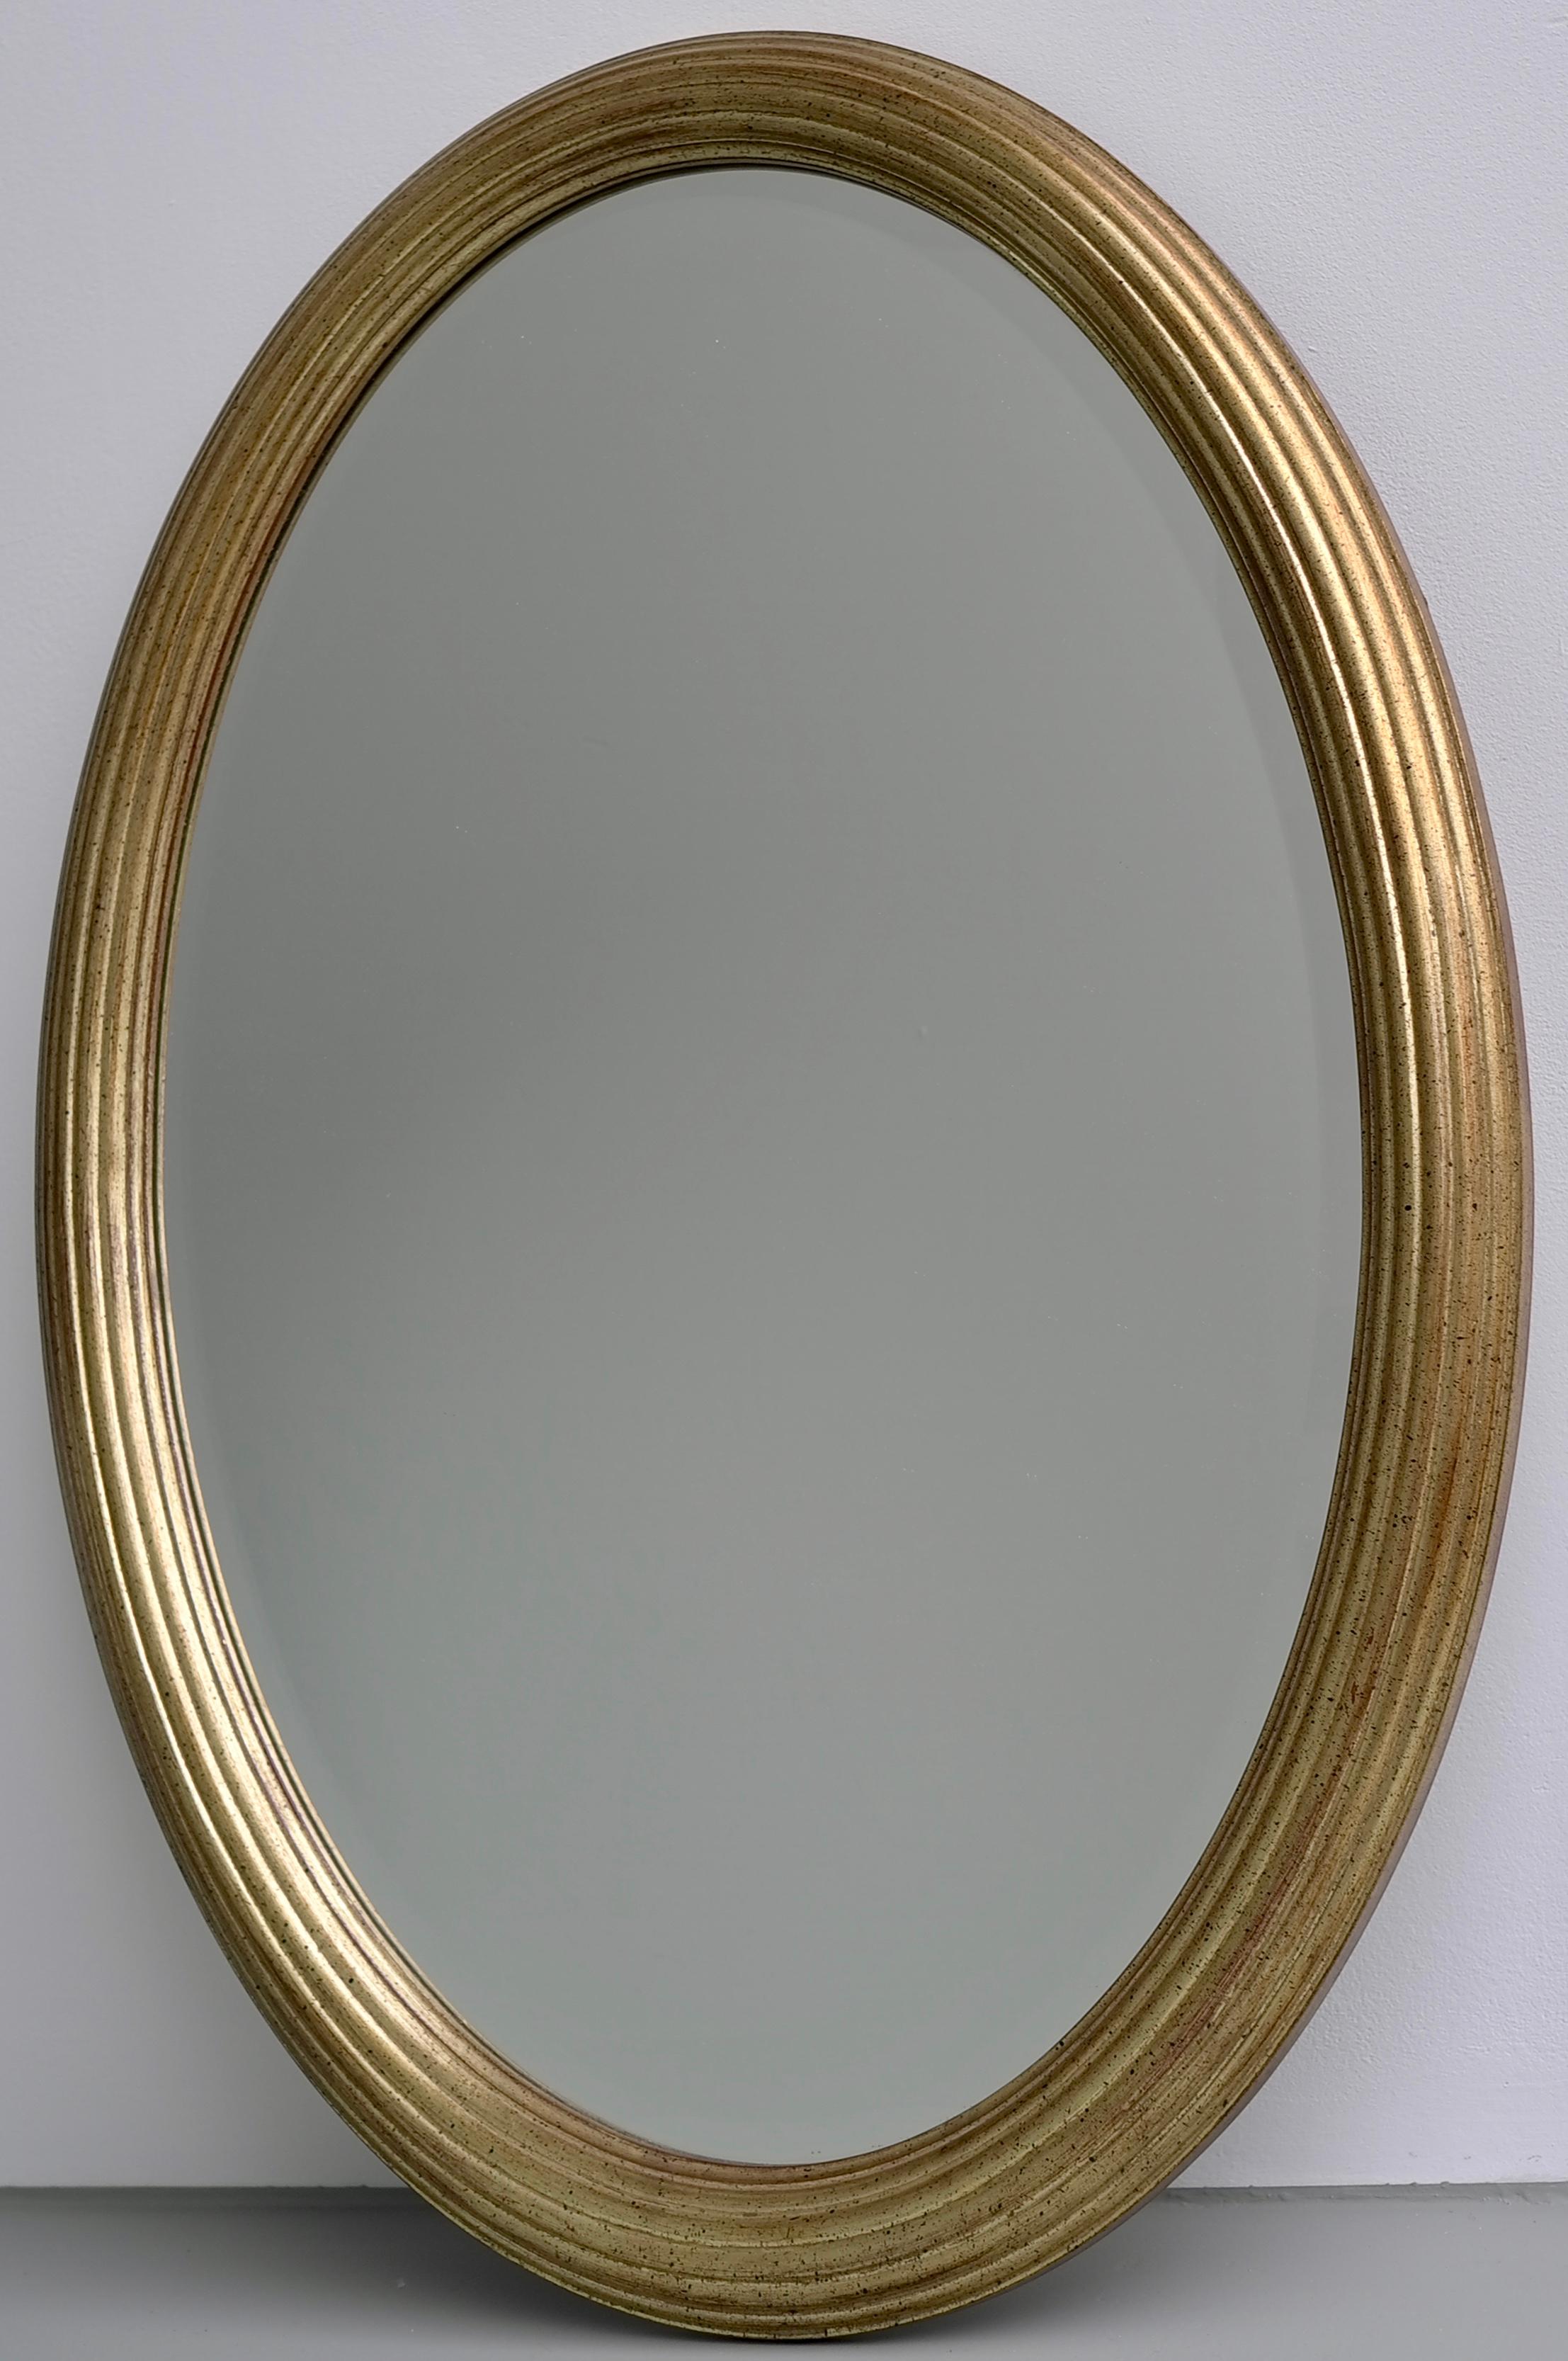 Classic French oval mirror in gold color with tiny black flakes and facet glass. You can hang this mirror vertical or horizontal.